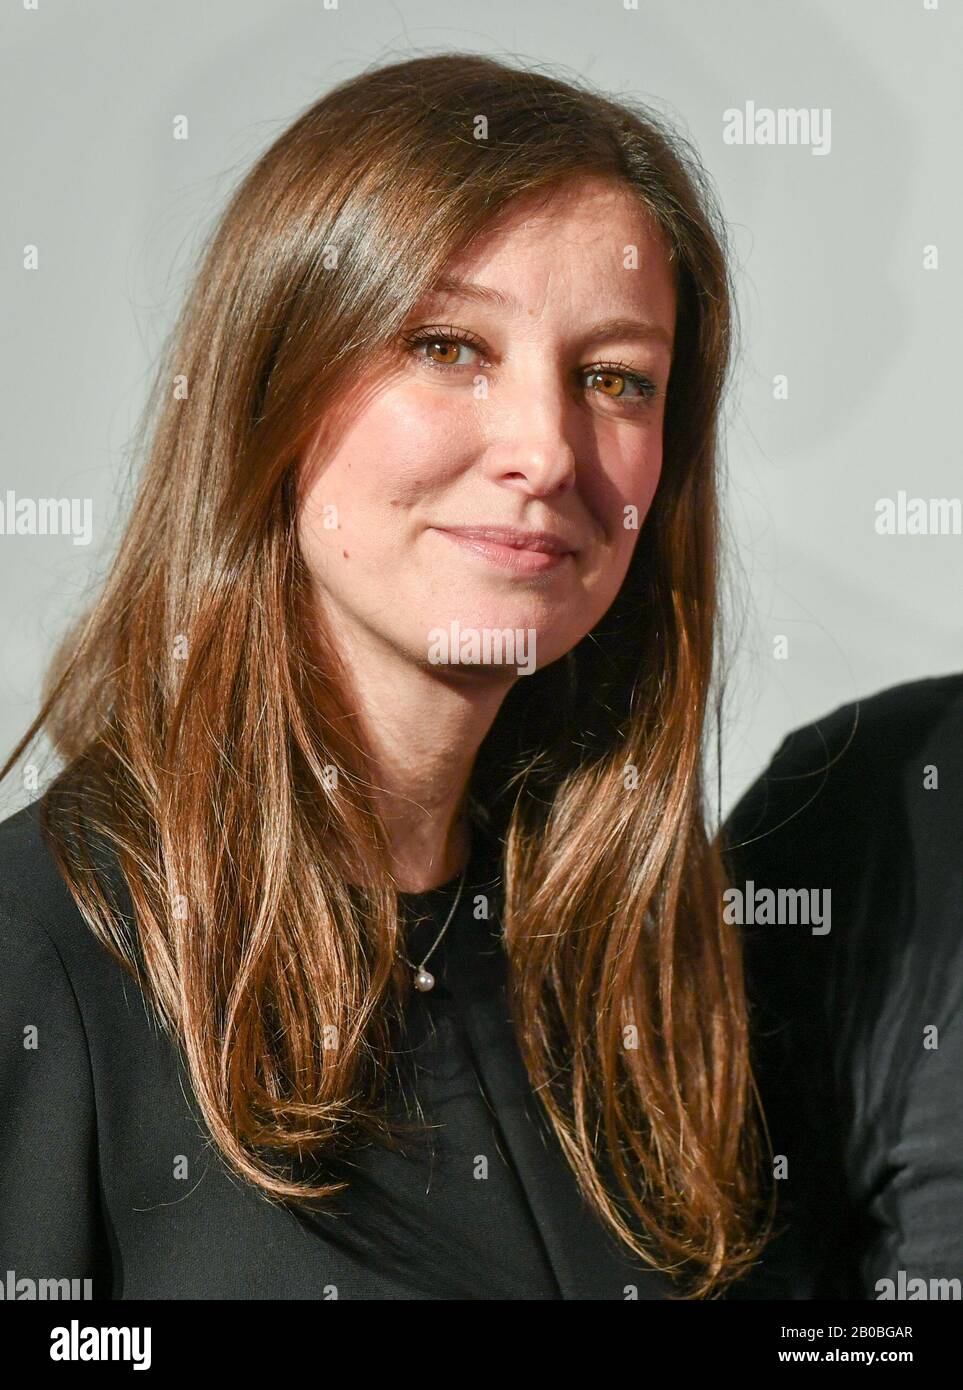 Berlin Germany 19th Feb Alexandra Maria Lara At The Tvnow Fiction Outlook 21 At Soho House Tvnow Is A Streaming Service And Now Shows Self Produced Fiction In Various Series Credit Jens